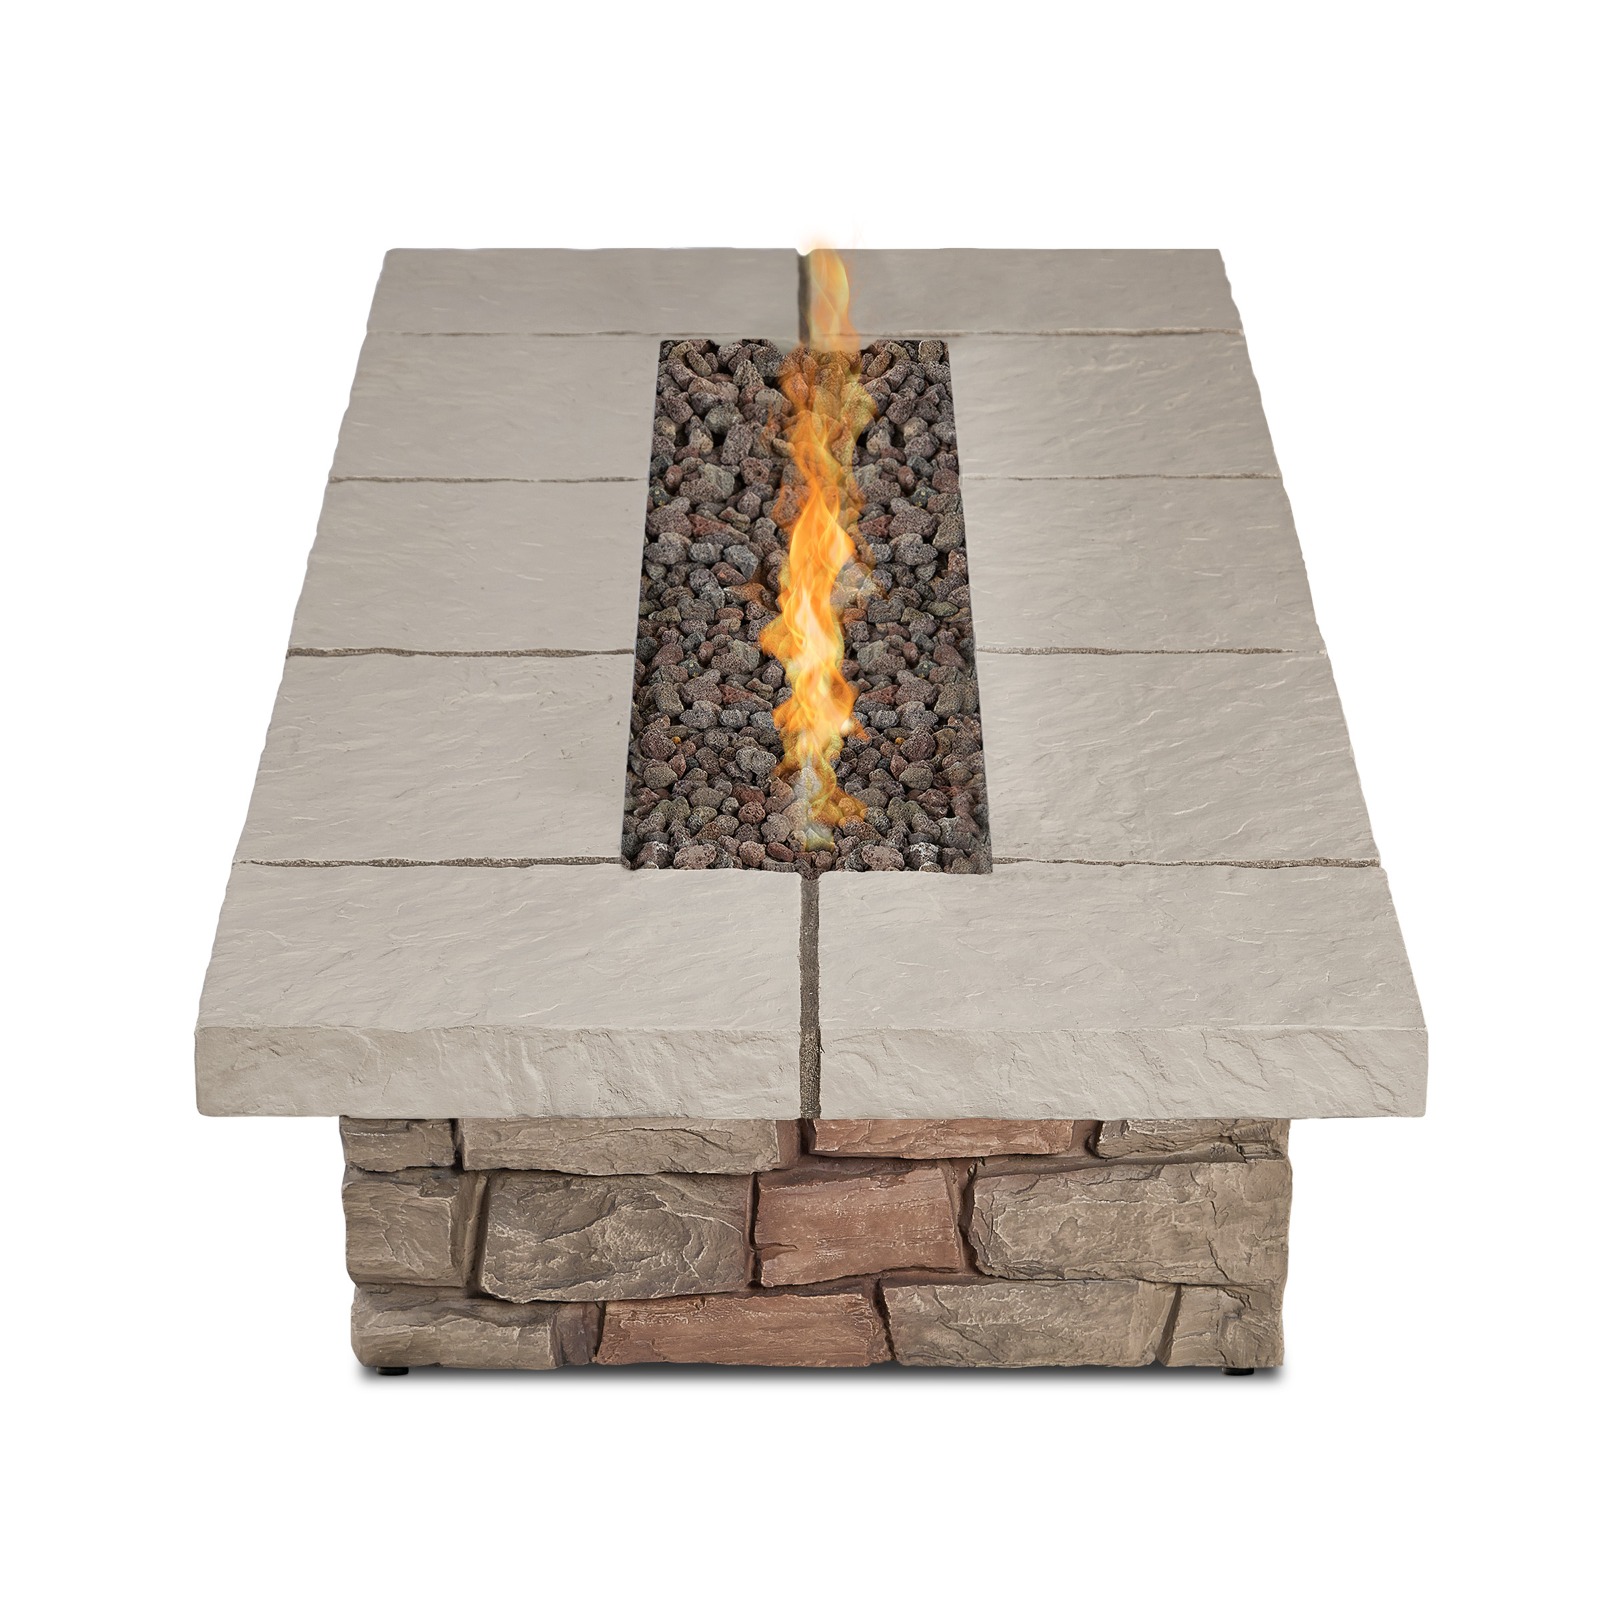 Sedona 66" Rectangle Propane Fire Pit Outdoor Fireplace Fire Table for Backyard or Patio